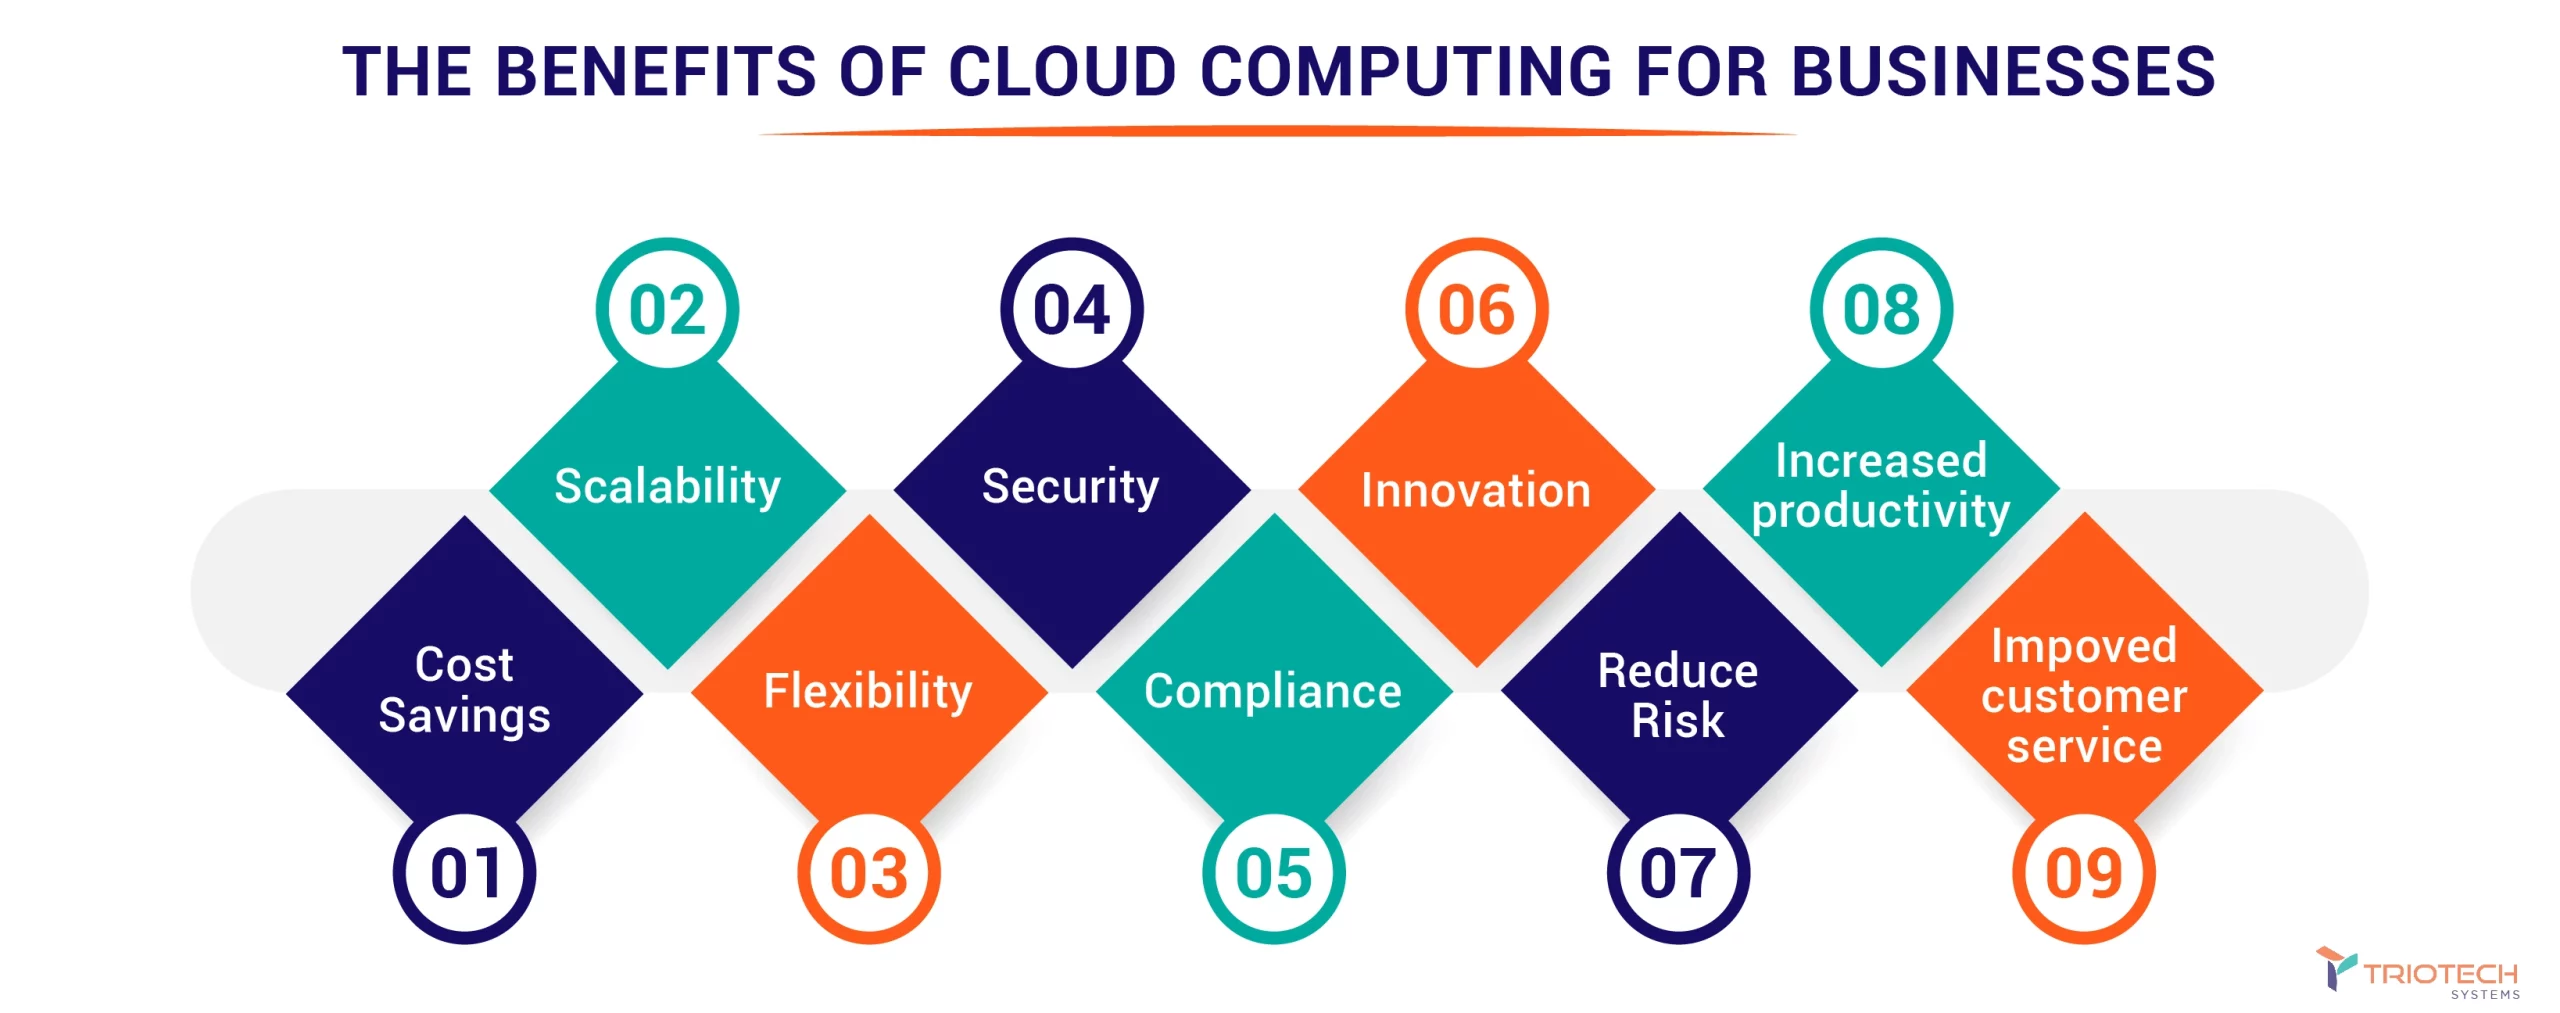 The benefits of cloud computing for a business